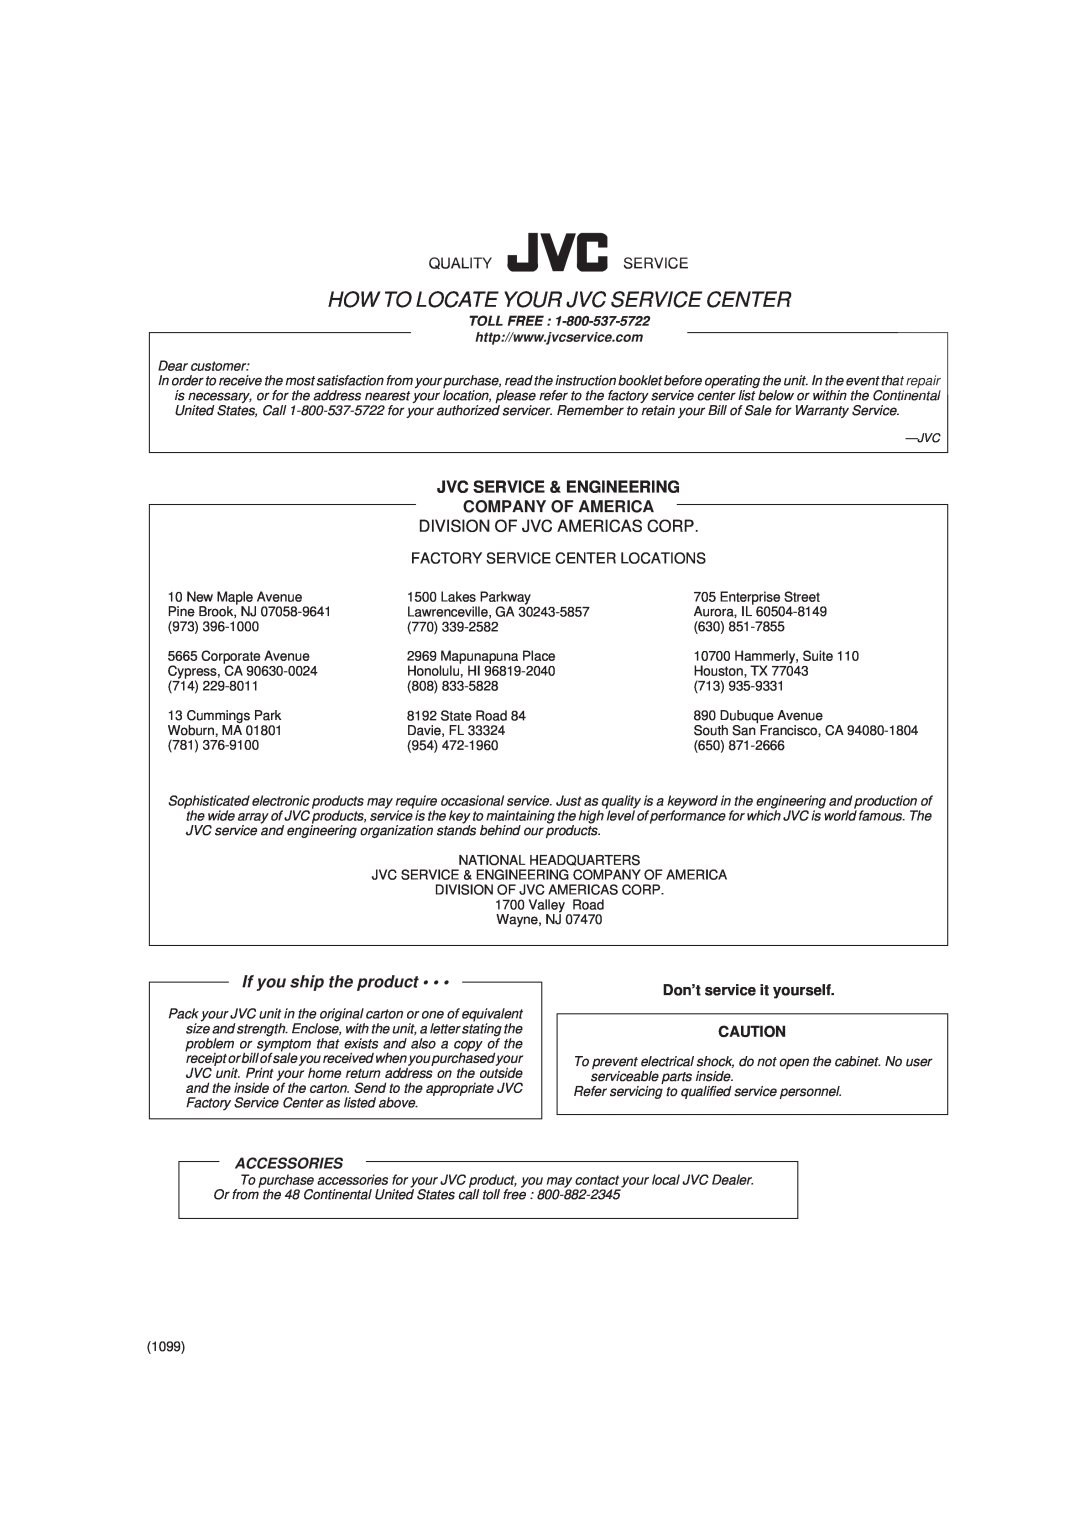 JVC RX-5000VBK manual How To Locate Your Jvc Service Center, Jvc Service & Engineering Company Of America, Qualityservice 